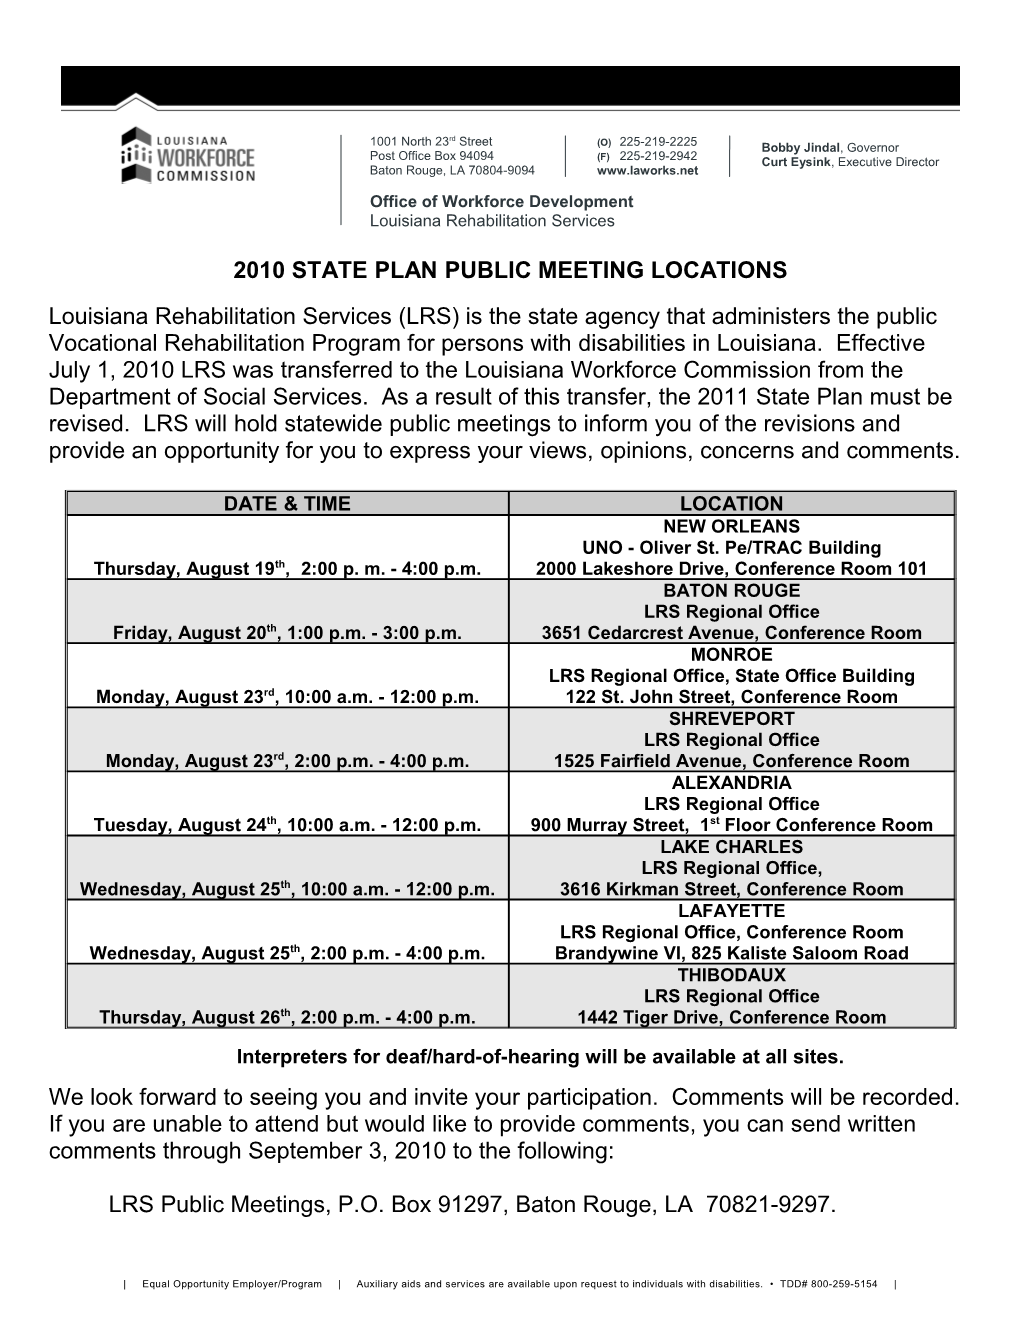 2010 State Plan Public Meeting Locations